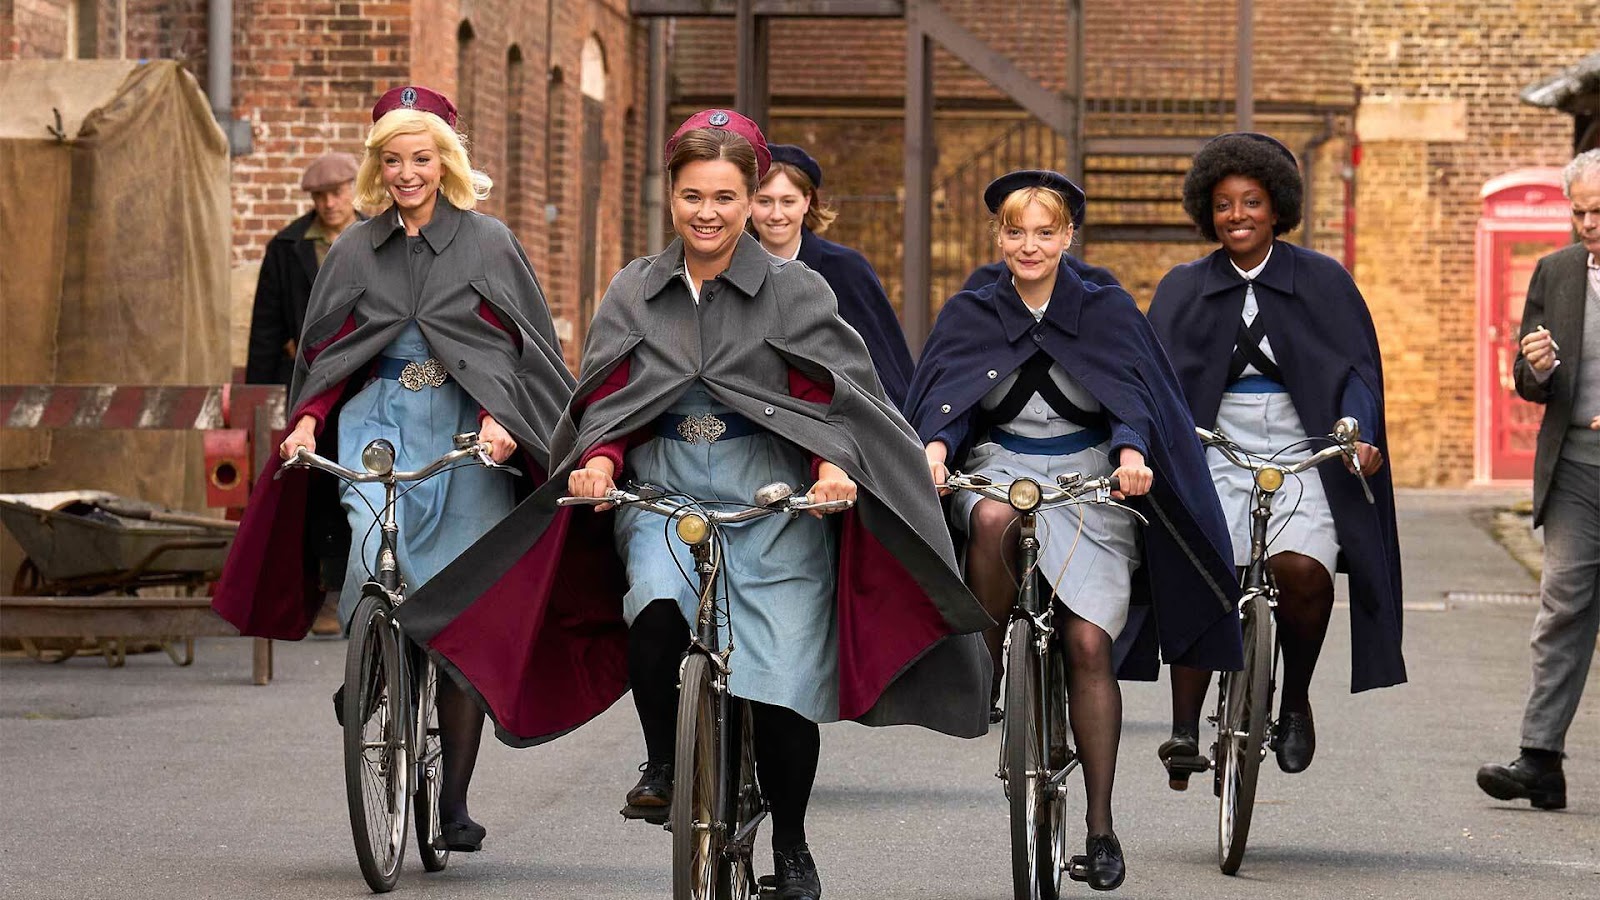 Call the Midwife and 13 cast